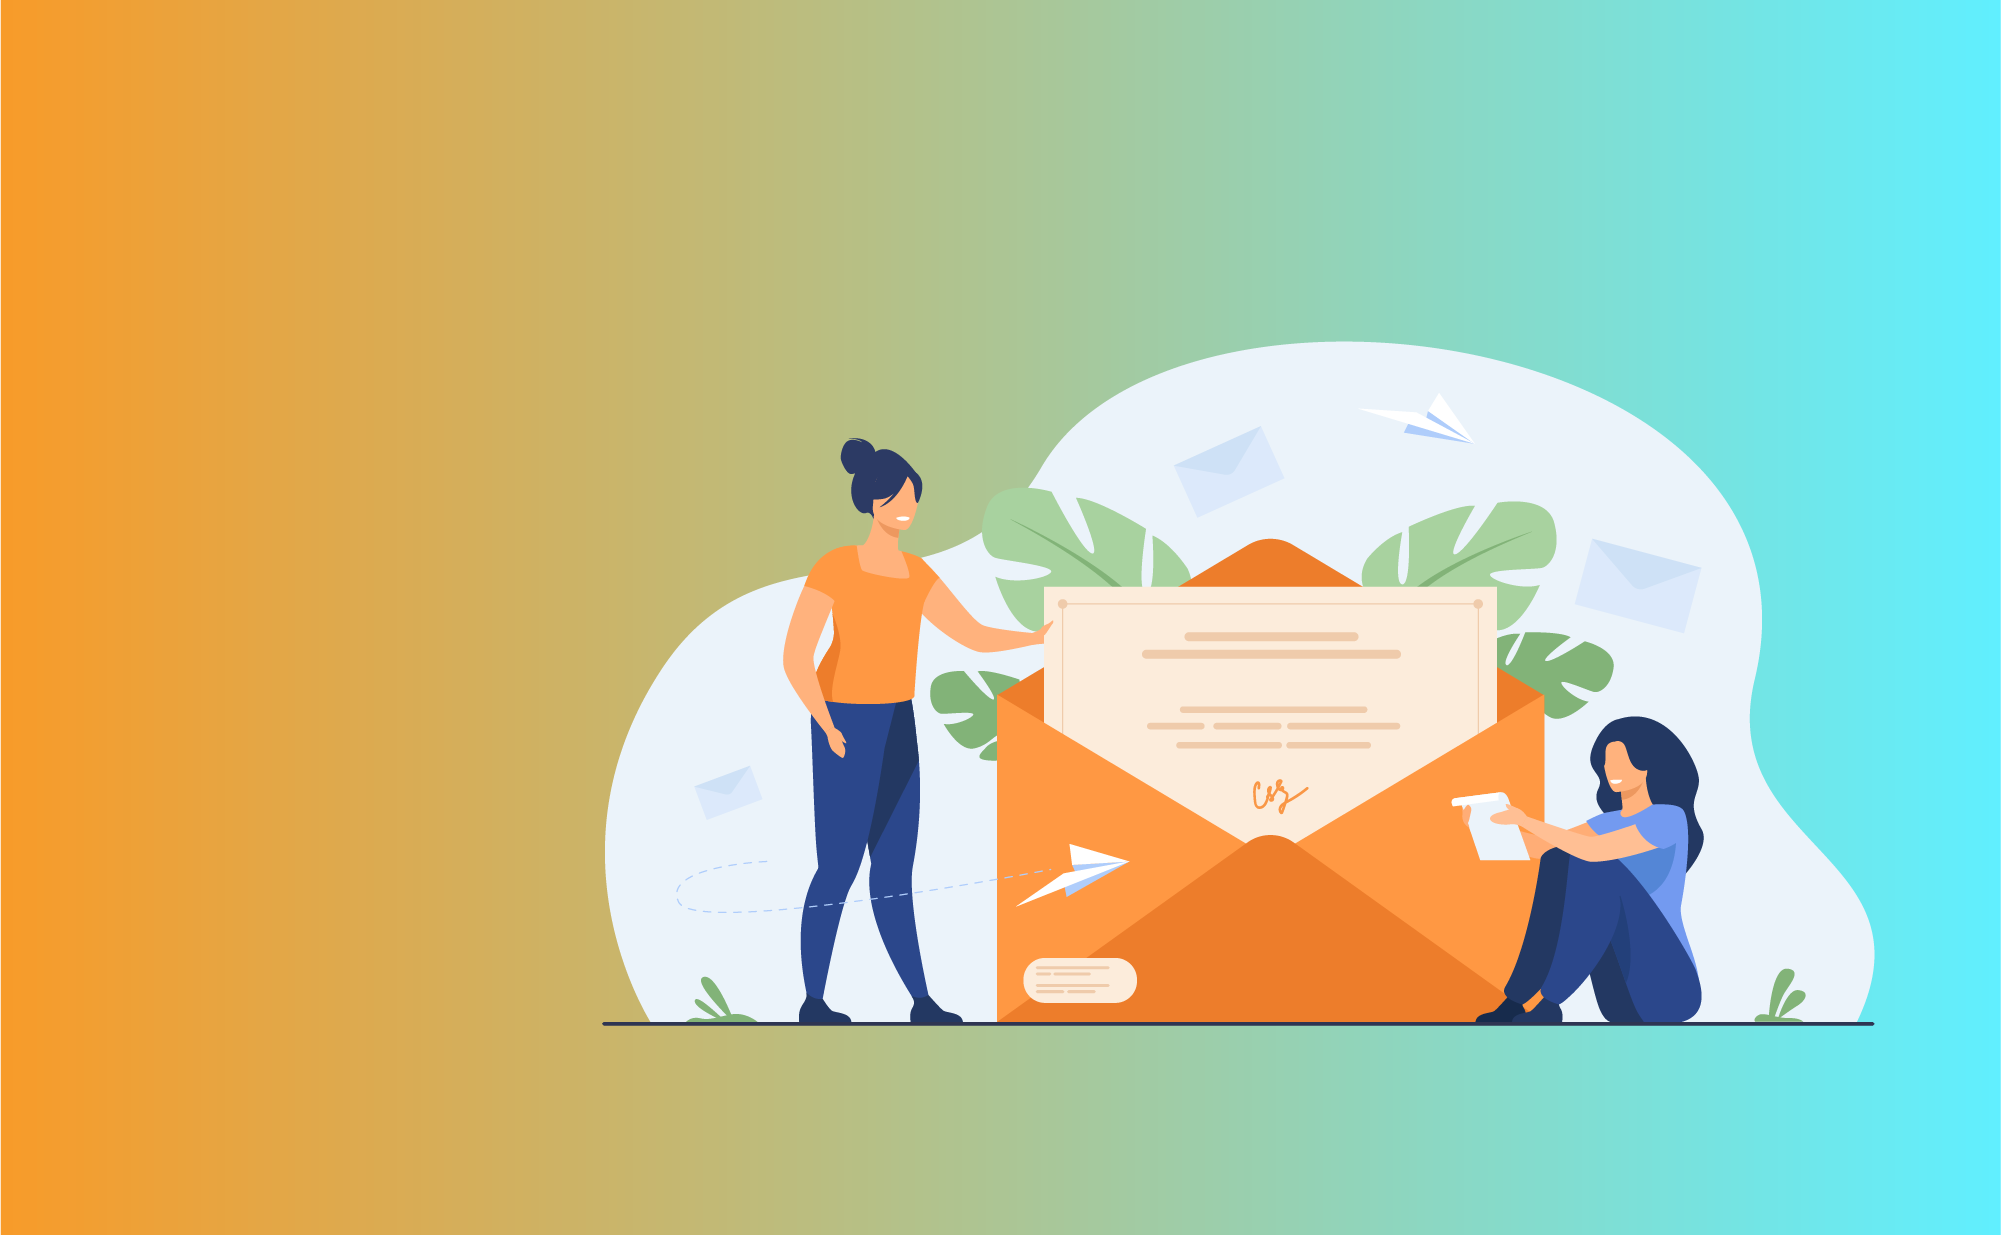 10 Simple Meeting Invitation Email Samples to Impress Your Clients